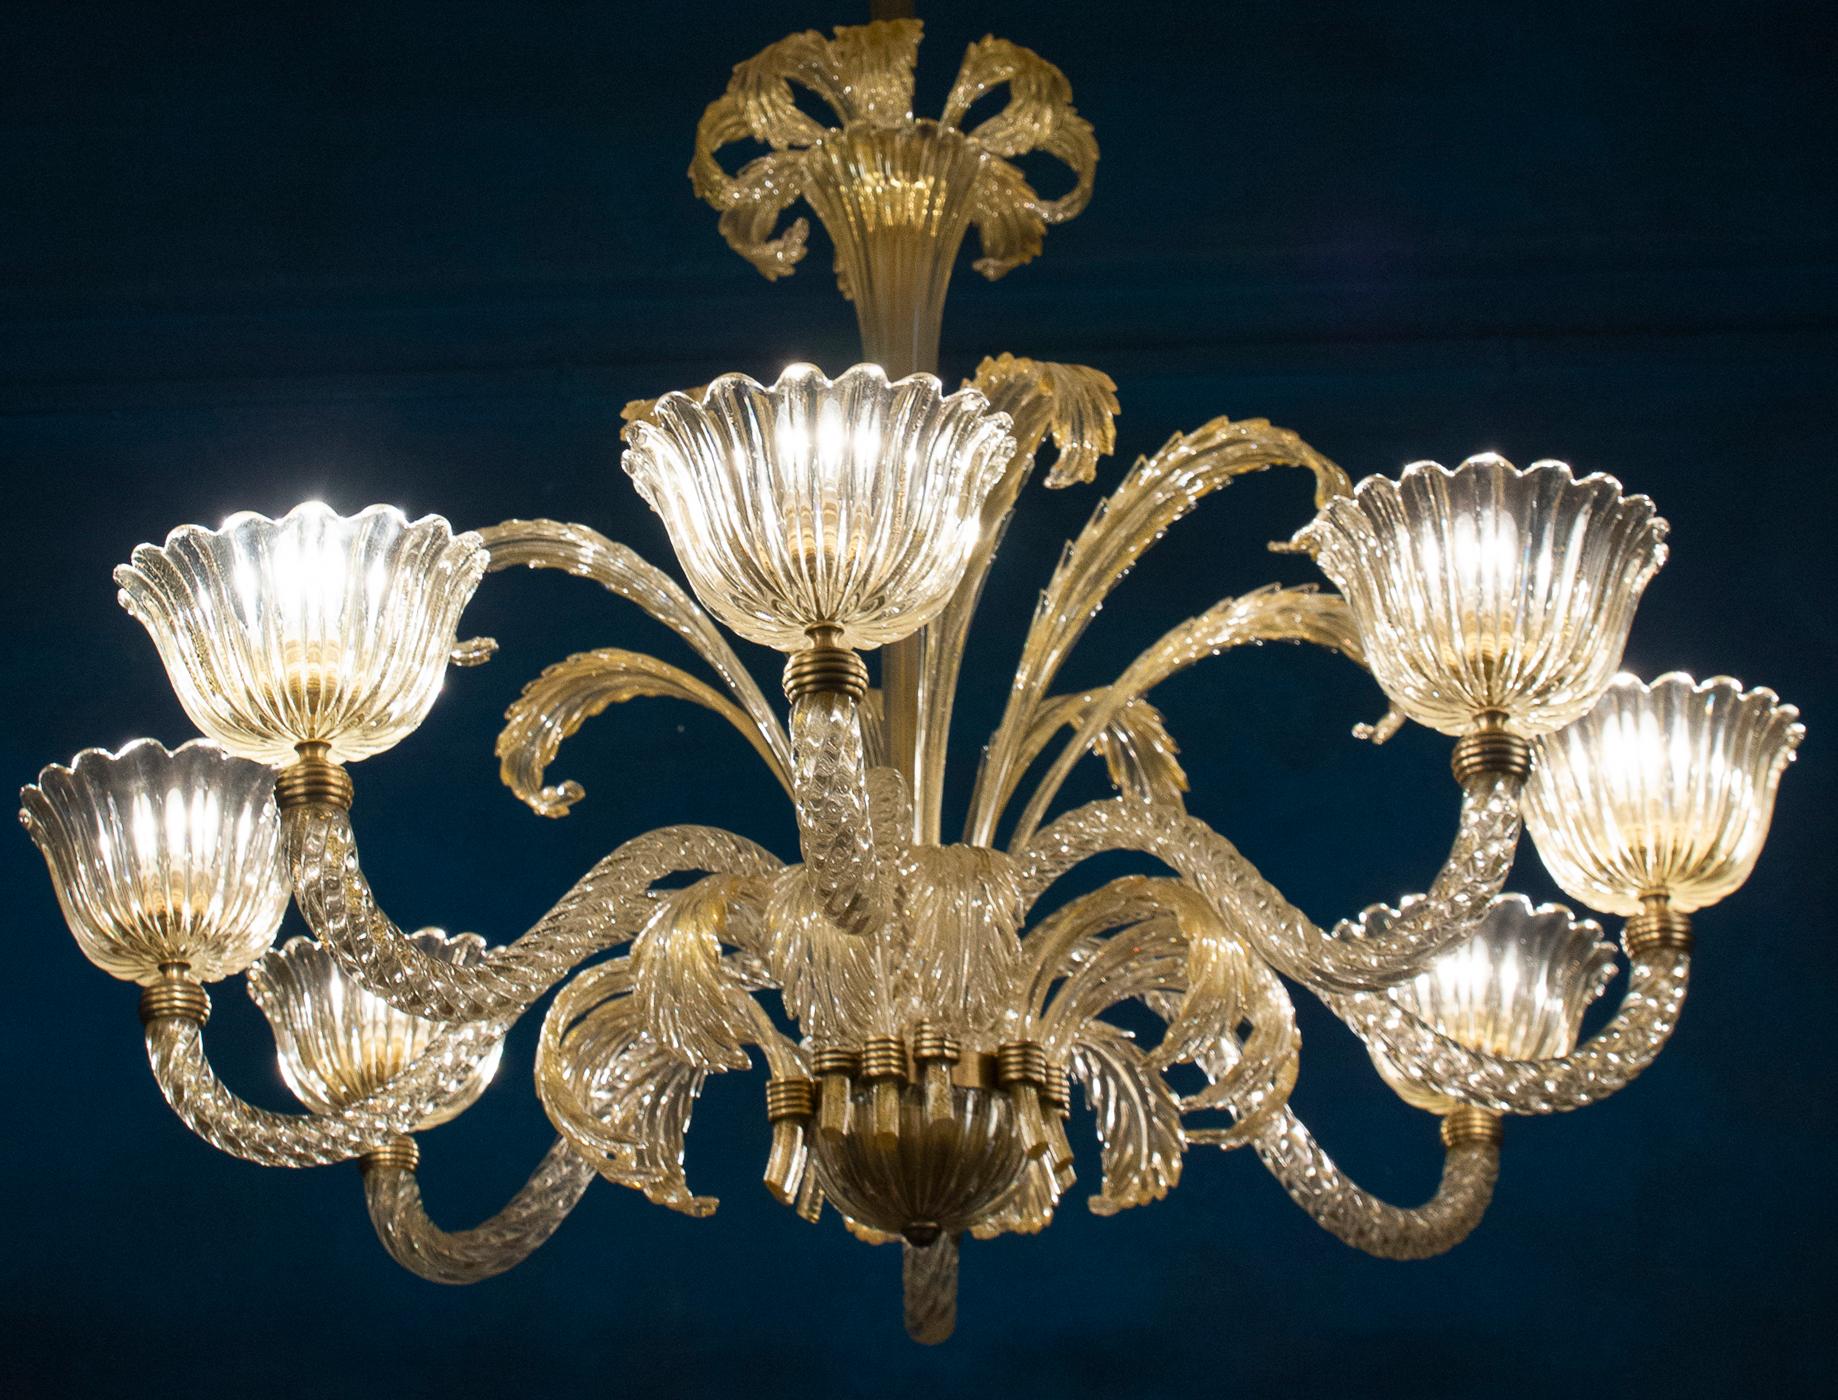 Magnificent Art Deco Mounted Murano Glass Chandelier by Ercole Barovier, 1940 For Sale 4